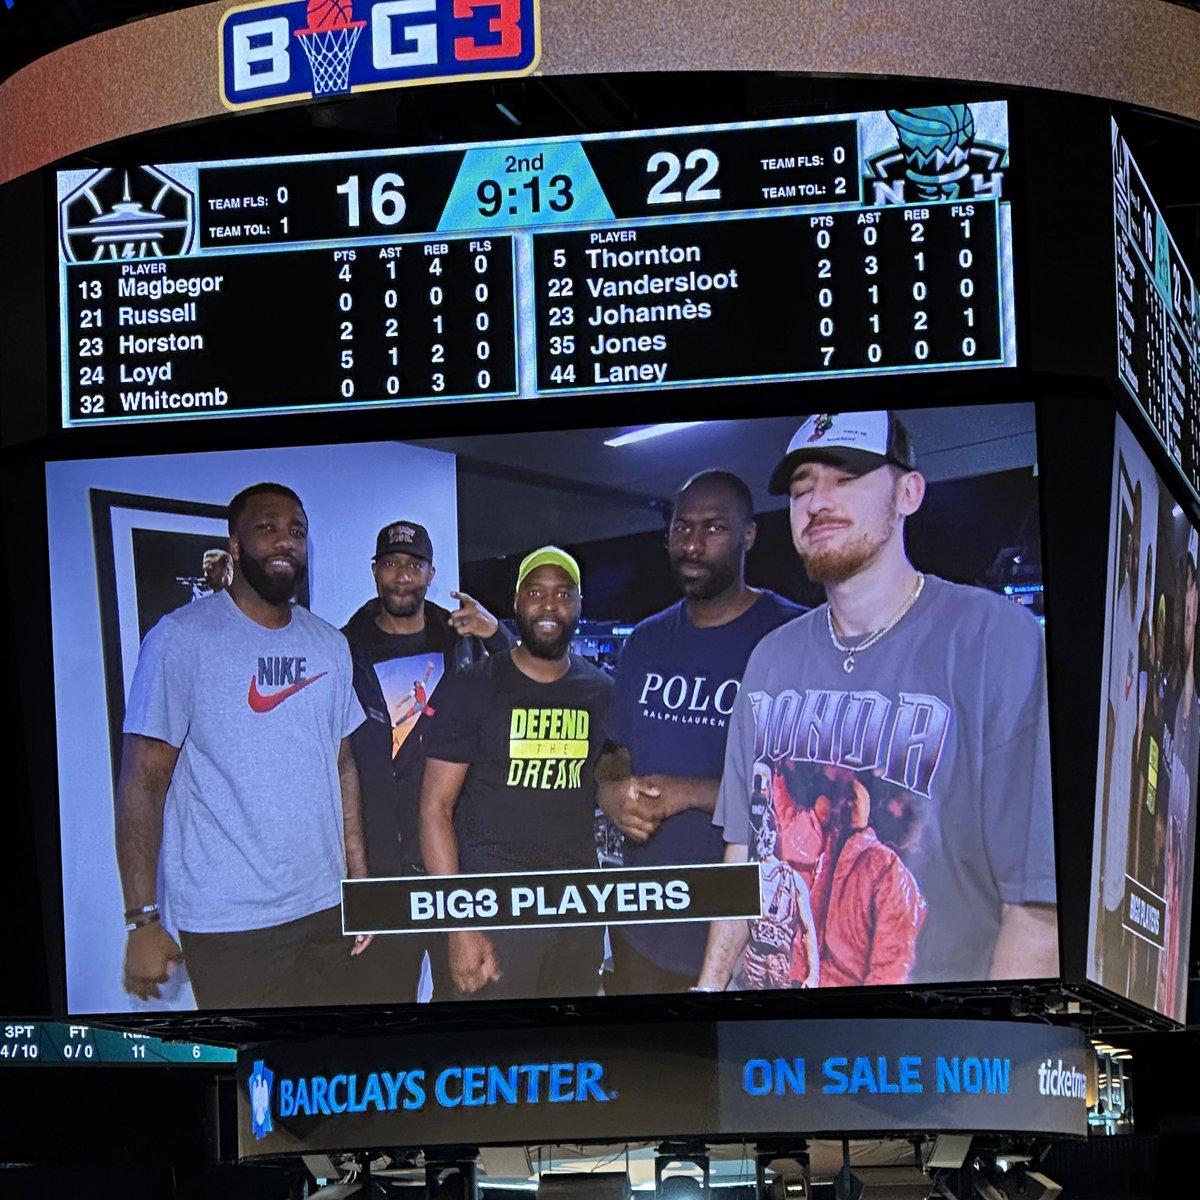 Players from @thebig3 are here in attendance for Storm-Liberty at the Barclays Center. #WNBATwitter https://t.co/T1rl1Qtcz8